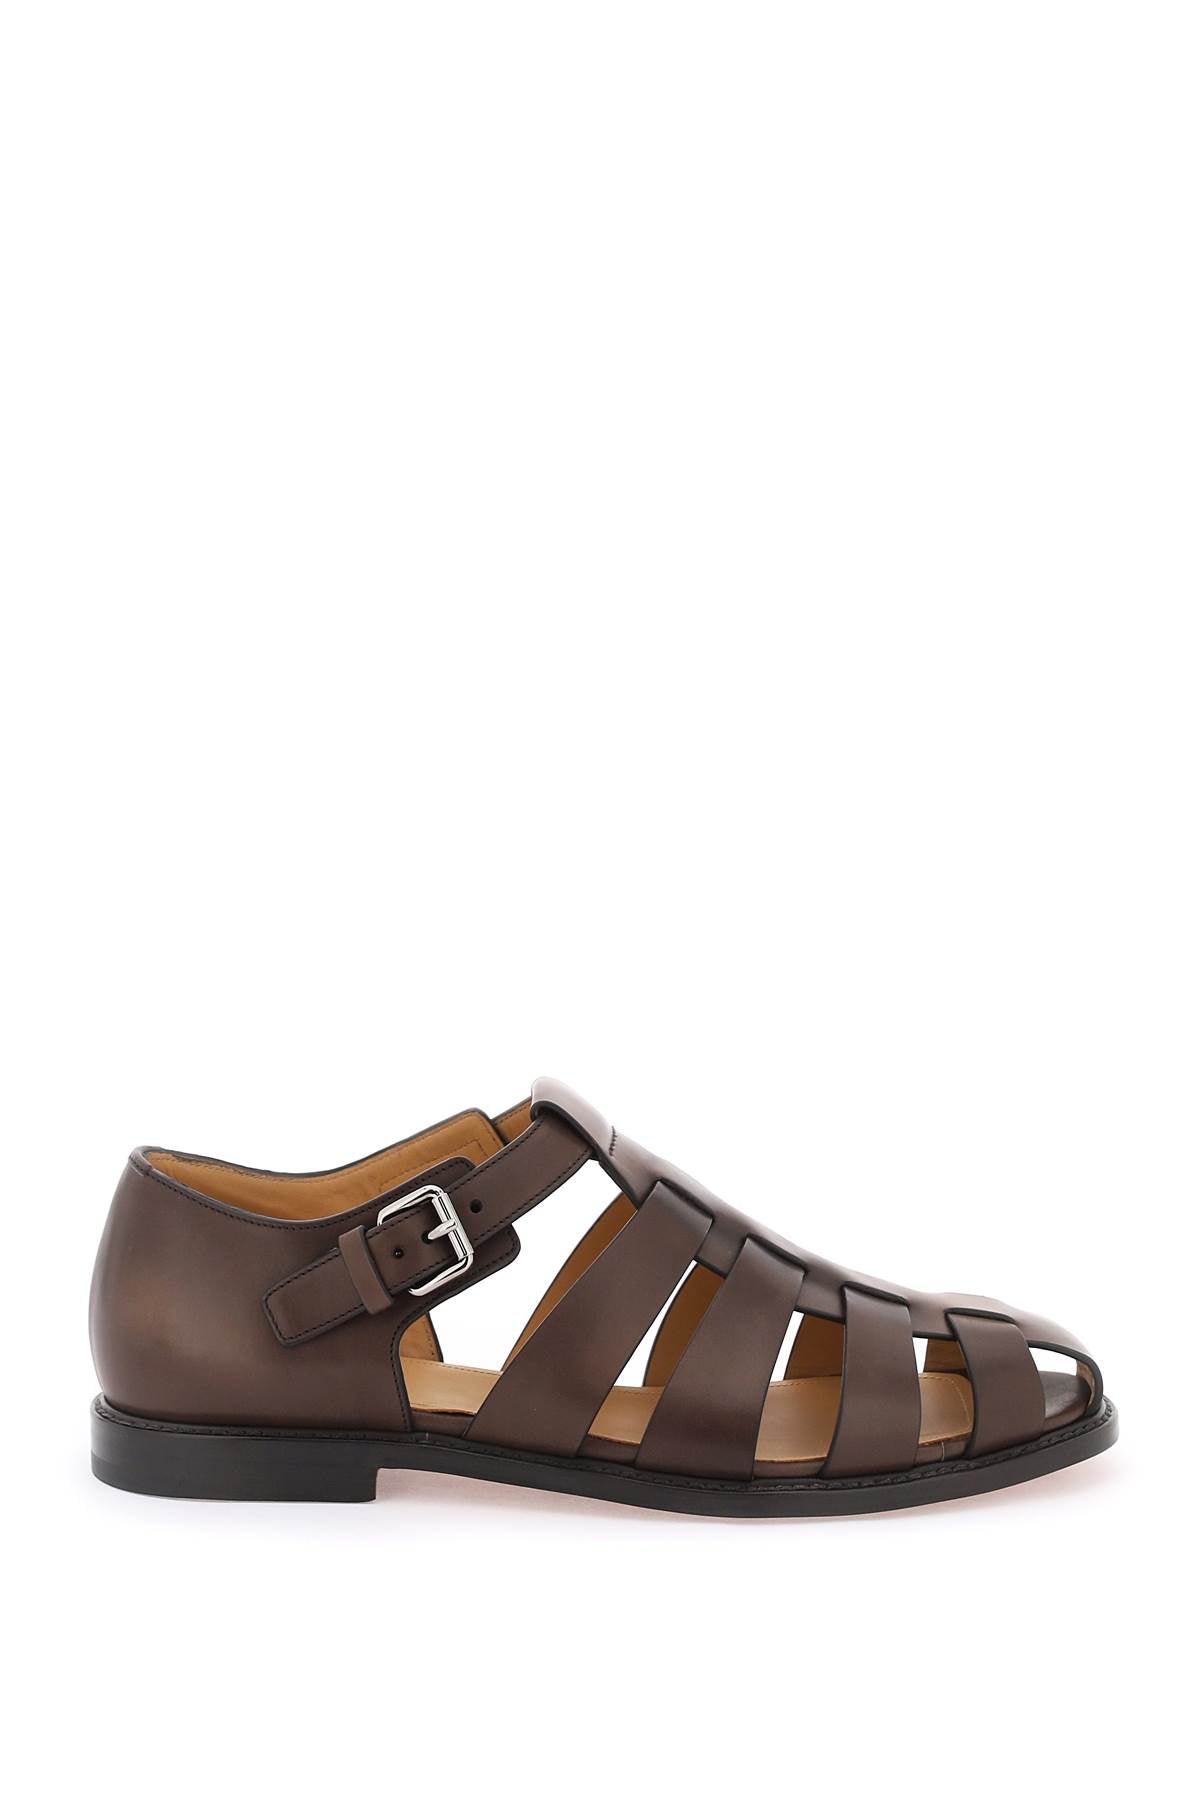 Church's leather fisherman sandals-0